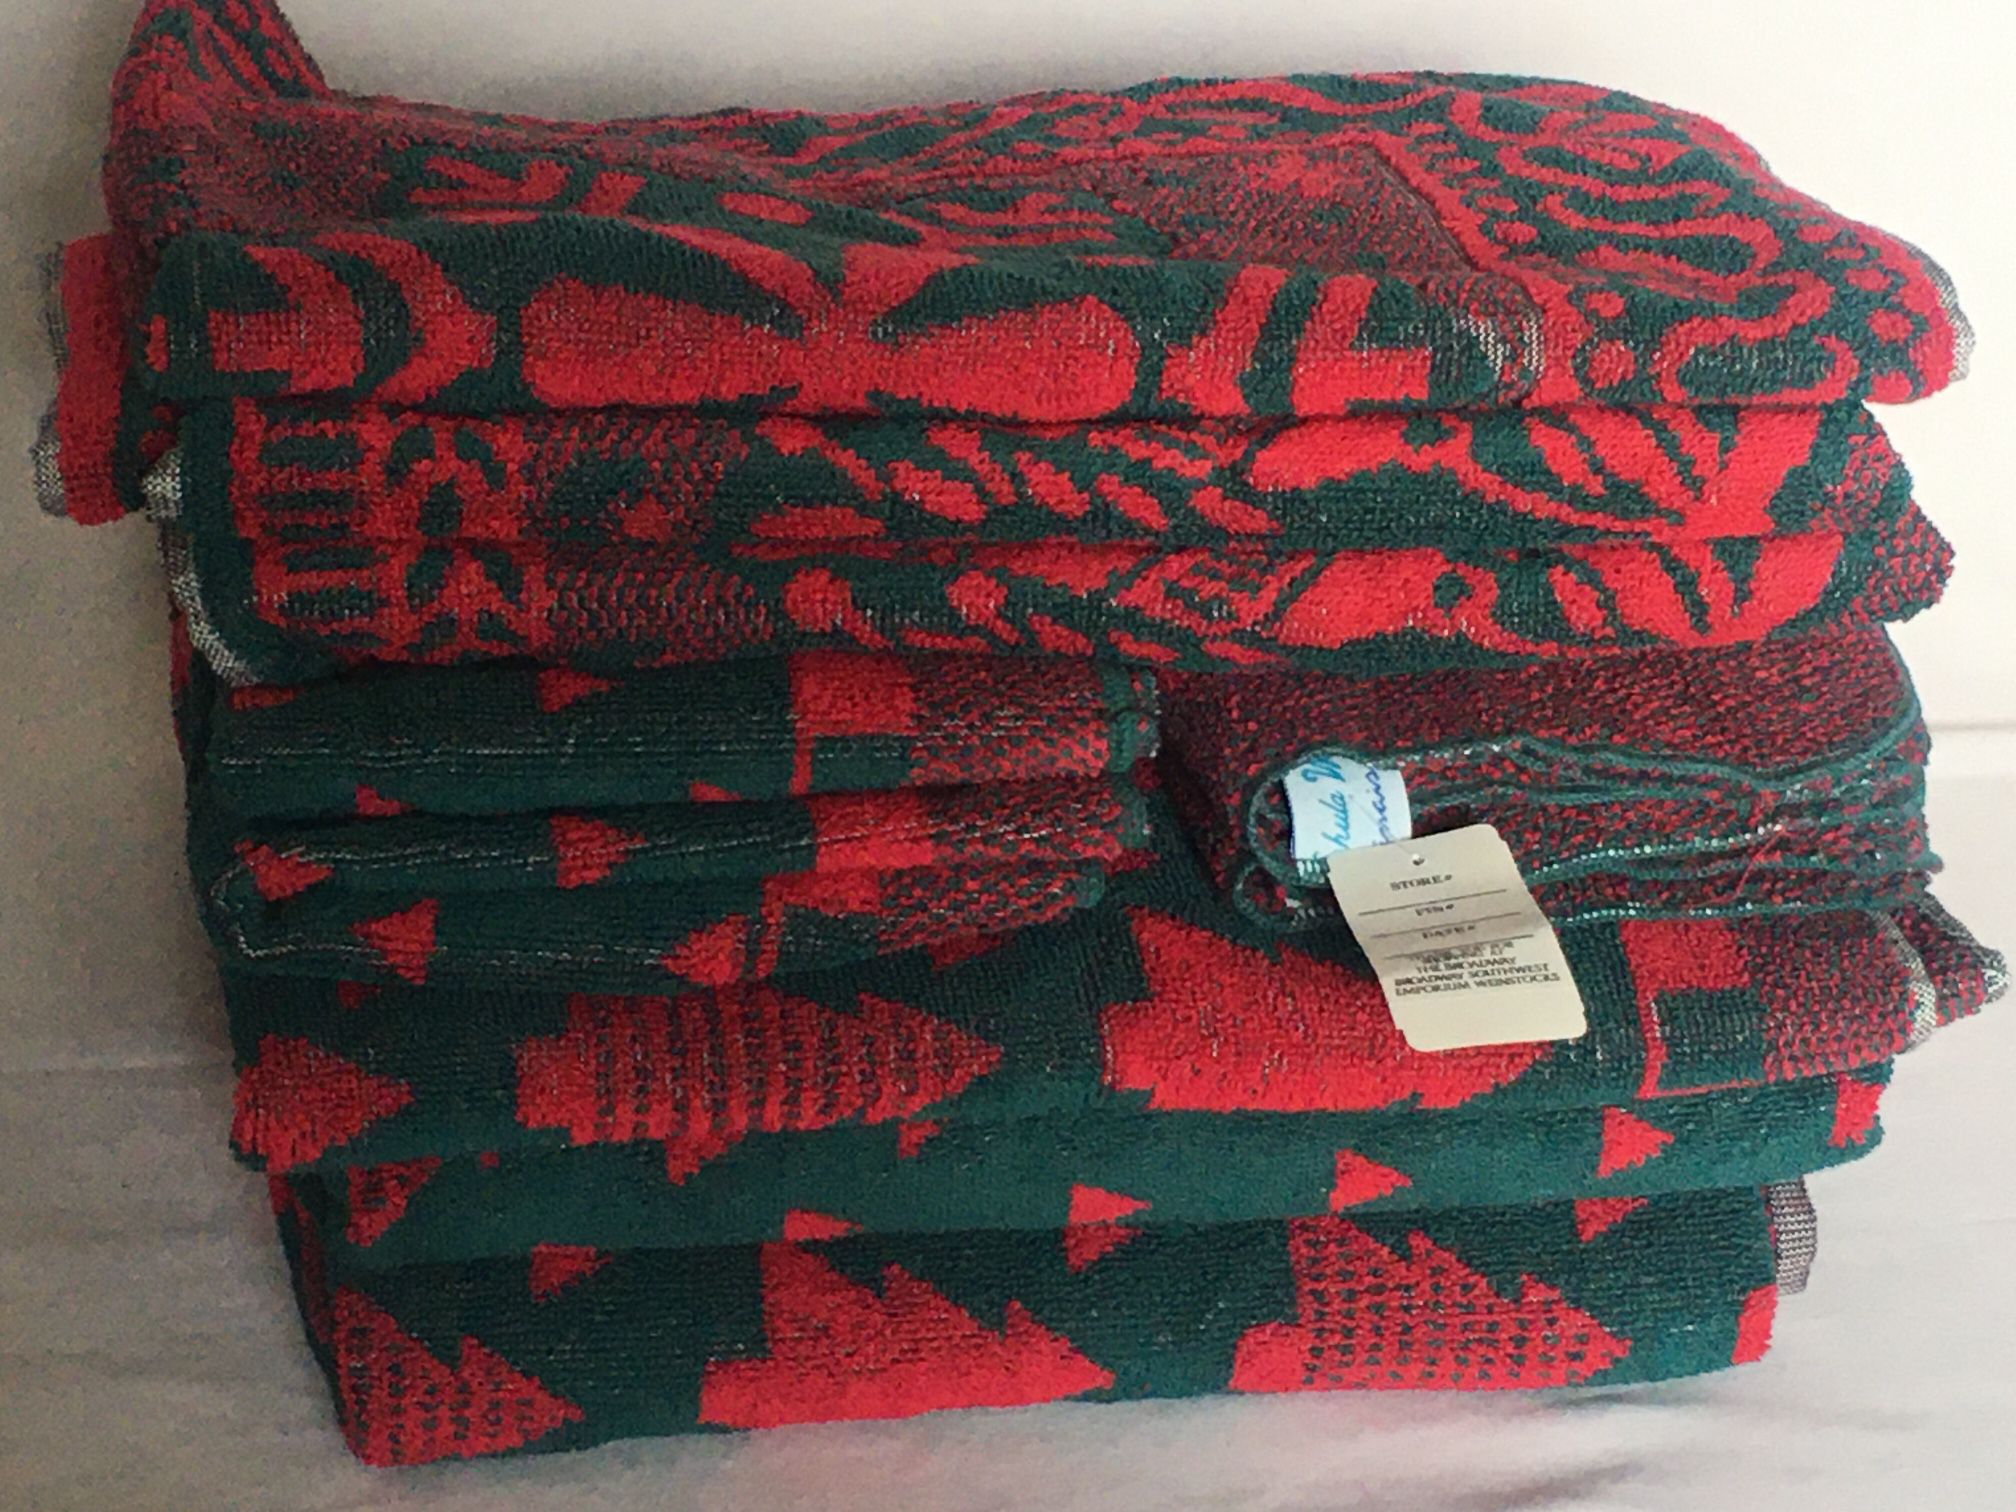 Lot 10 New EXTREMELY RARE Vintage CHRISTMAS TOWEL  - Made in Israel - 100% Cotton ‼️ Price Is FIRM ‼️